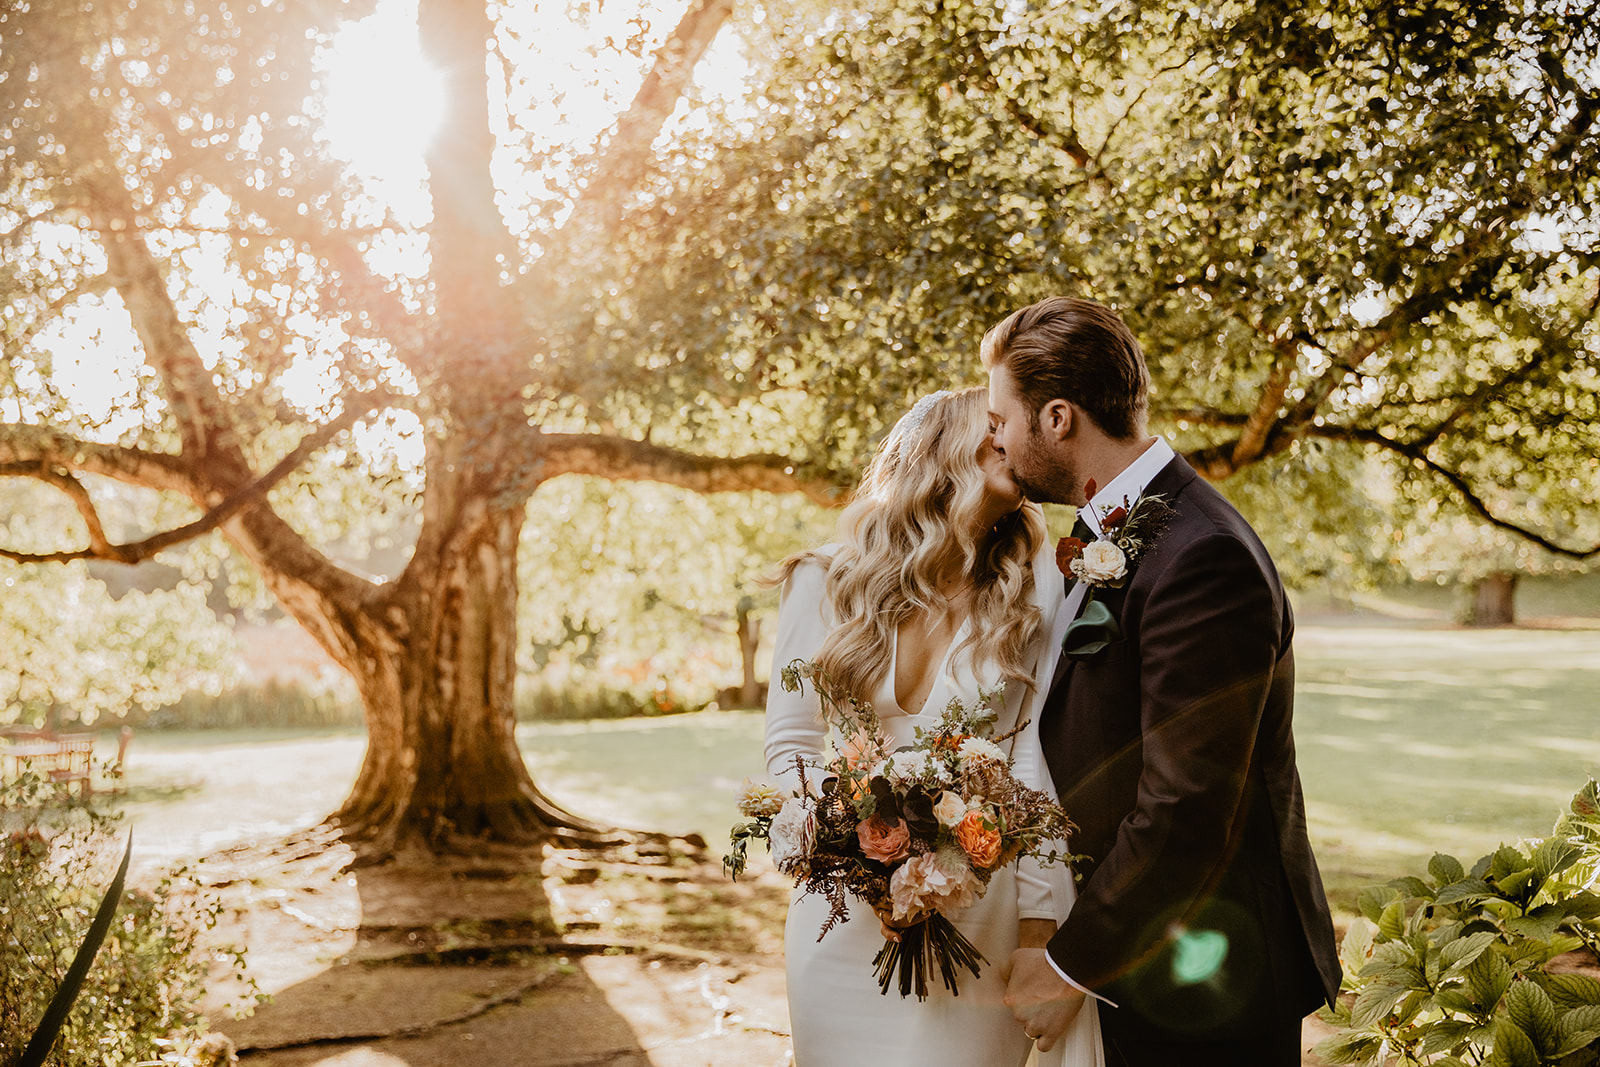 Bride and Groom in gardens at a Hampton Court House Wedding. By Olive Joy Photography